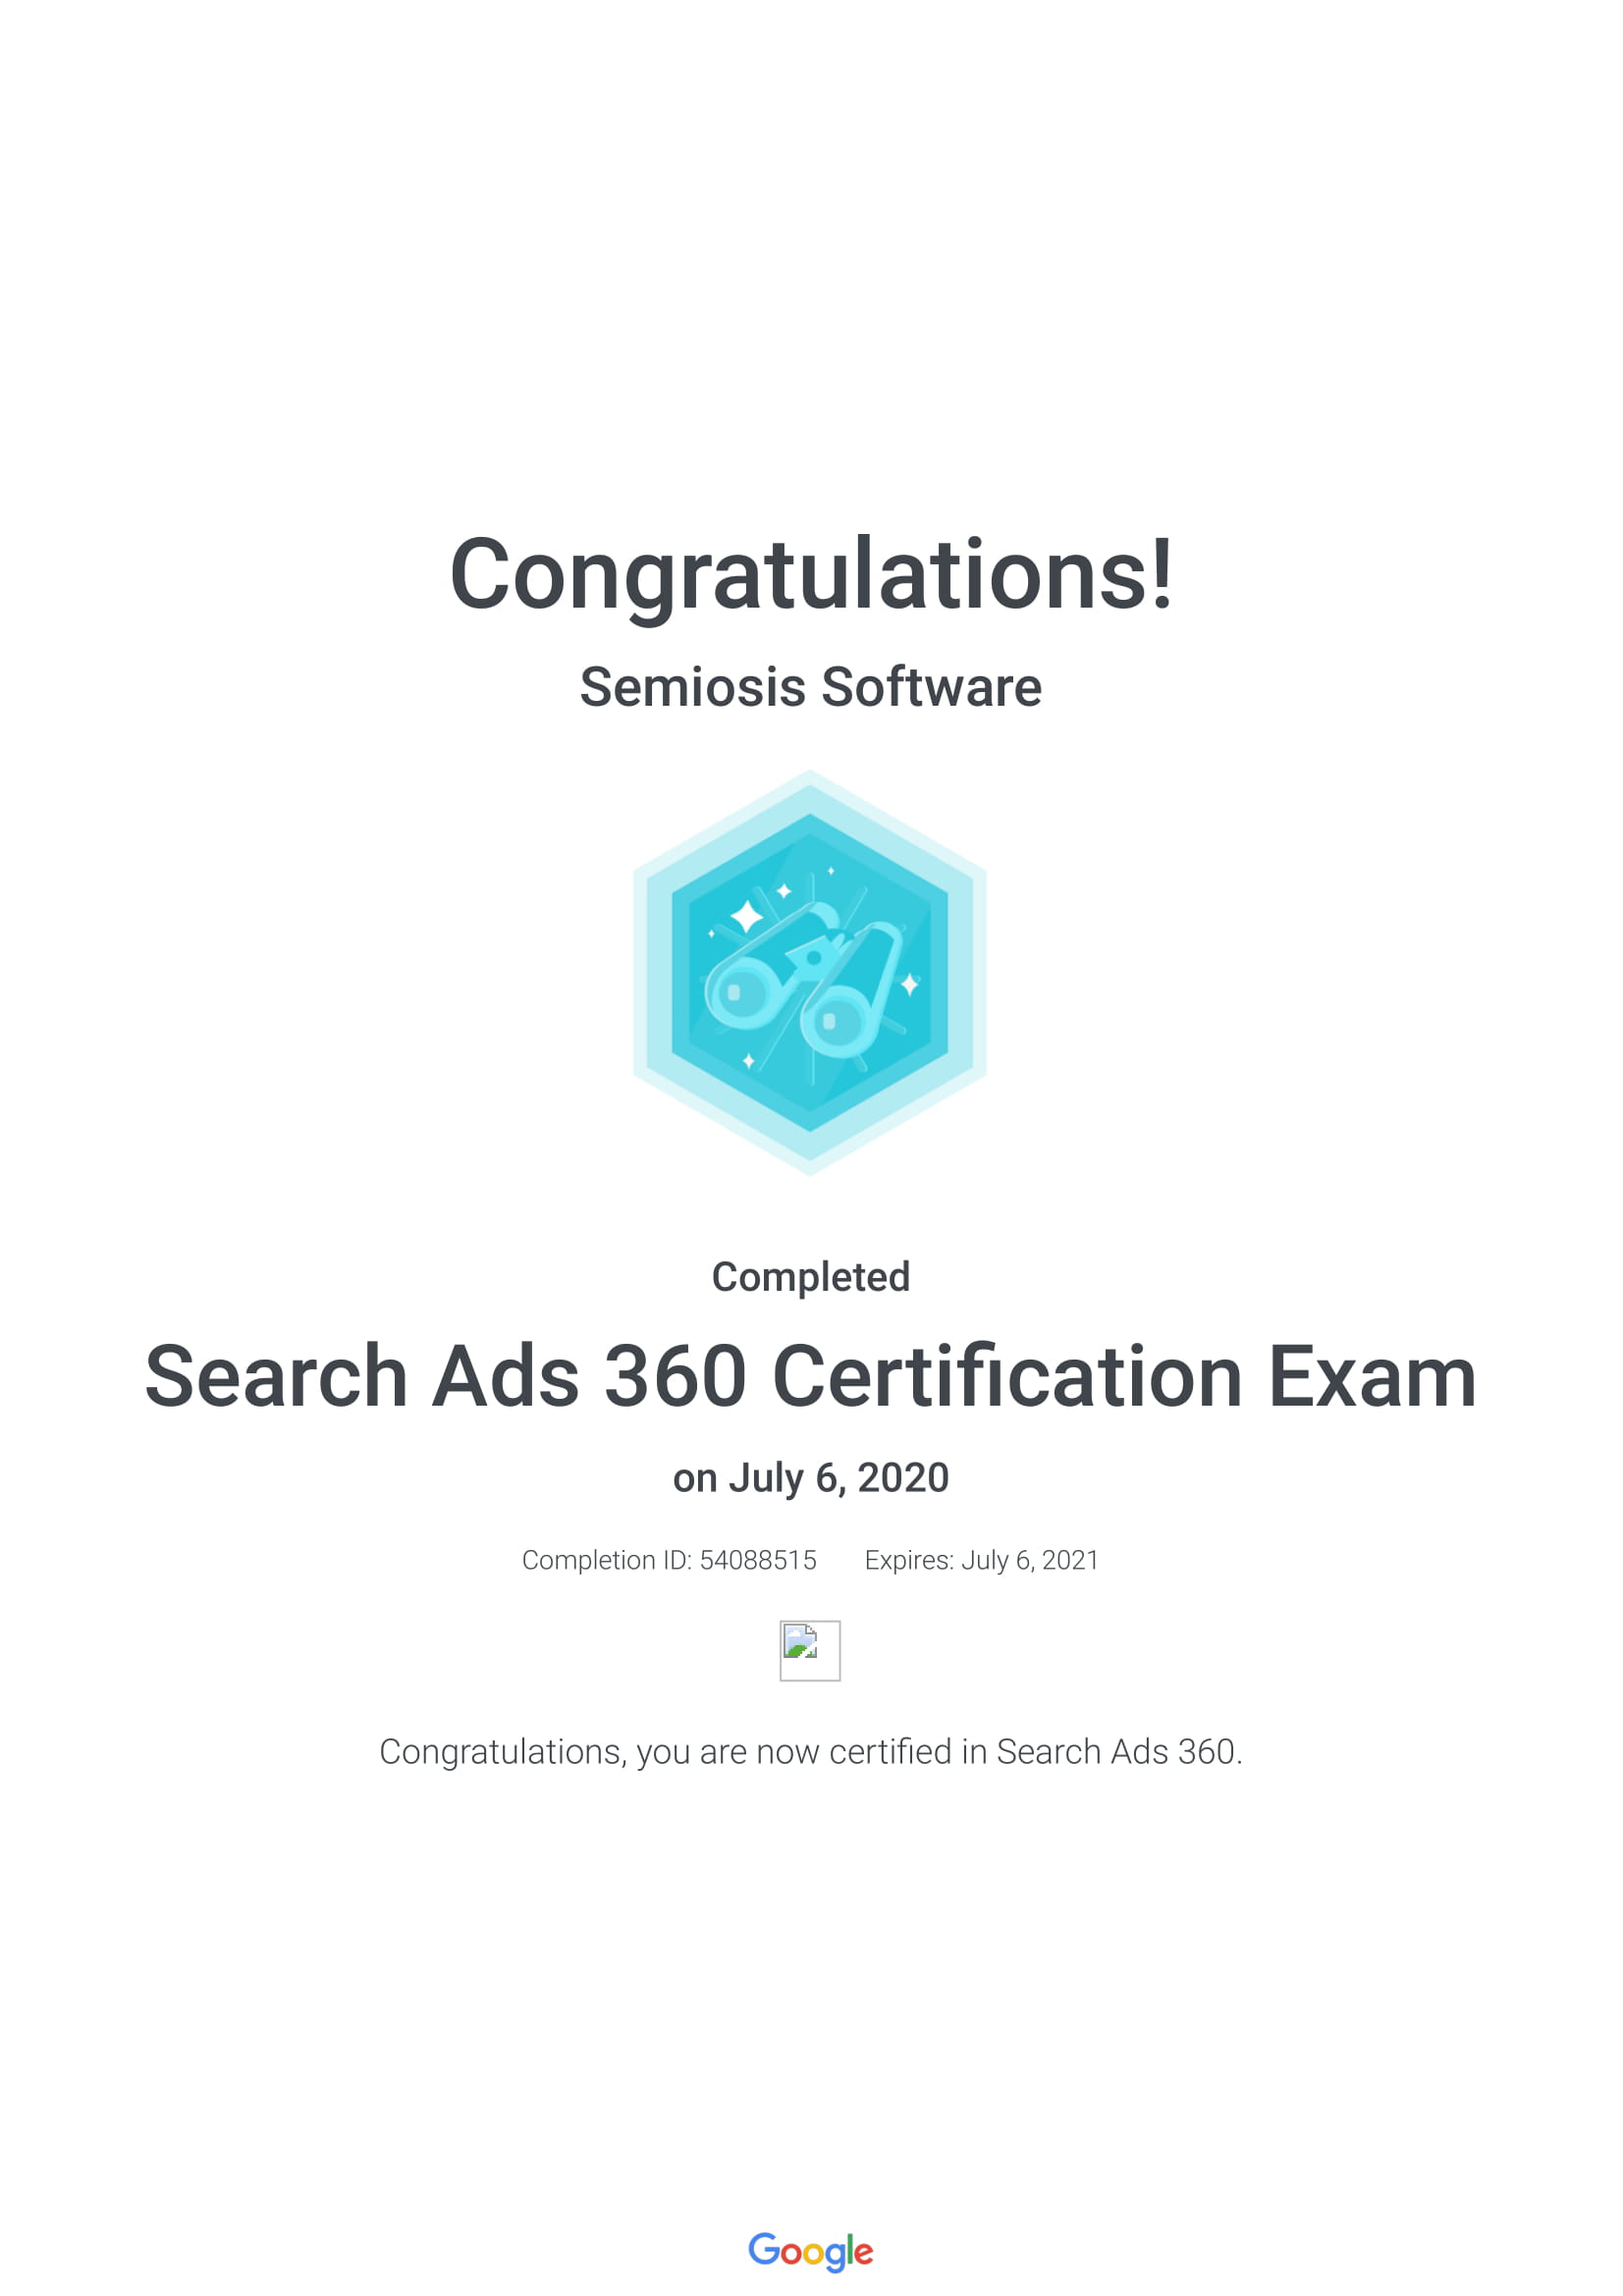 Search Ads 360 Certification Exam